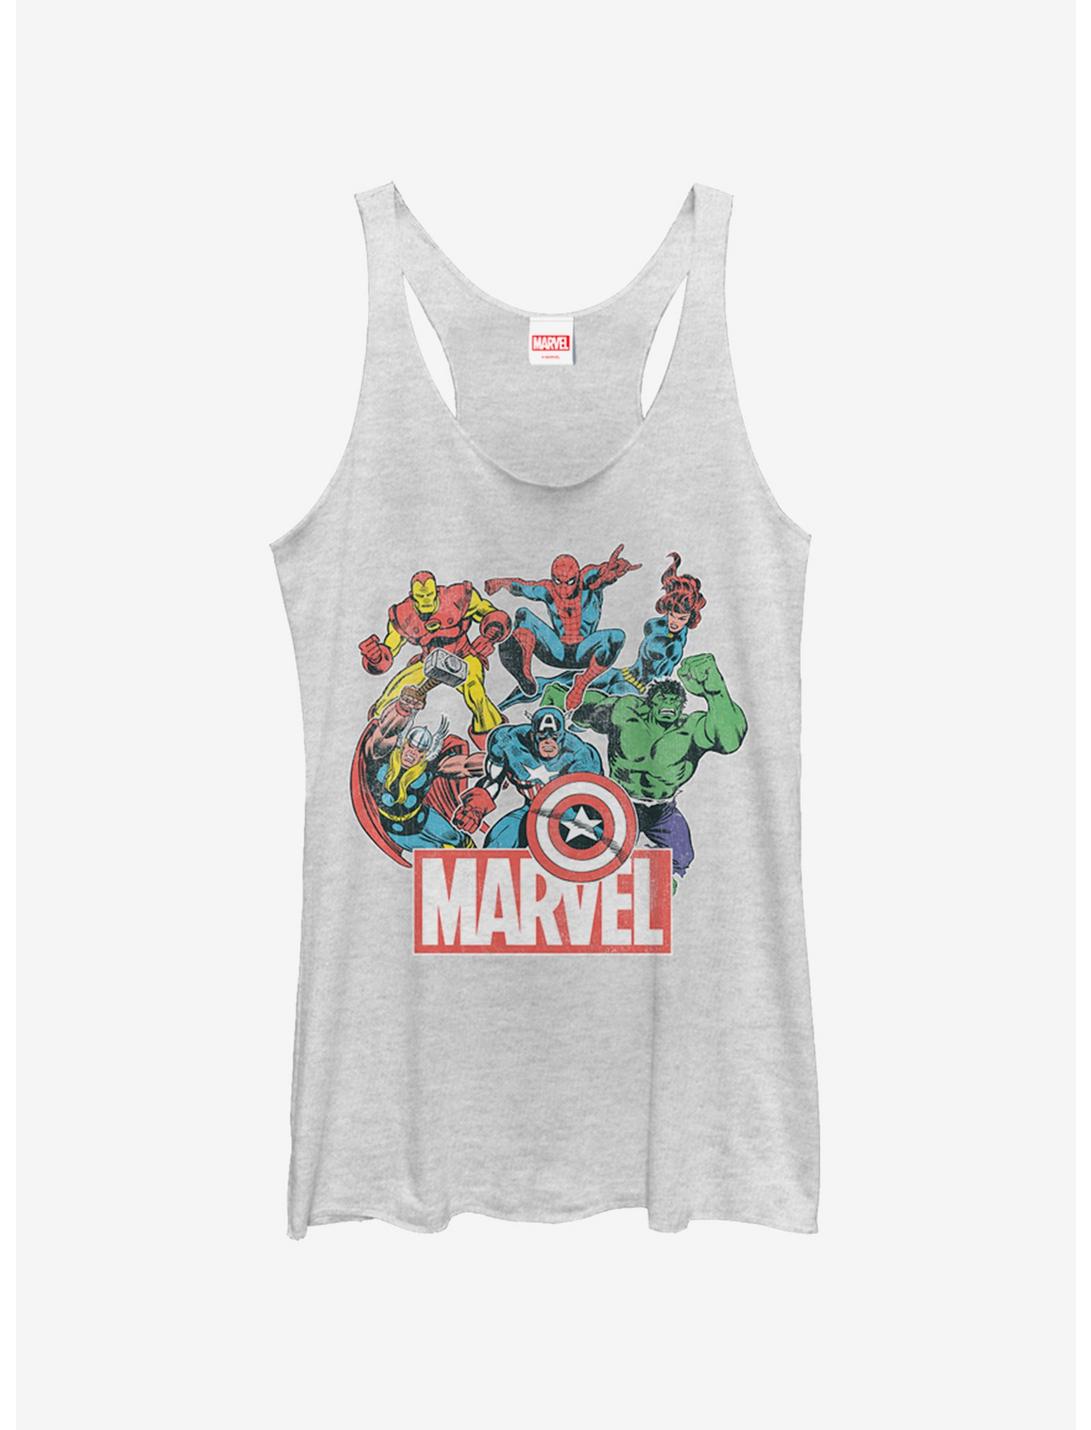 Marvel Heroes of Today Womens Tank Top, WHITE HTR, hi-res